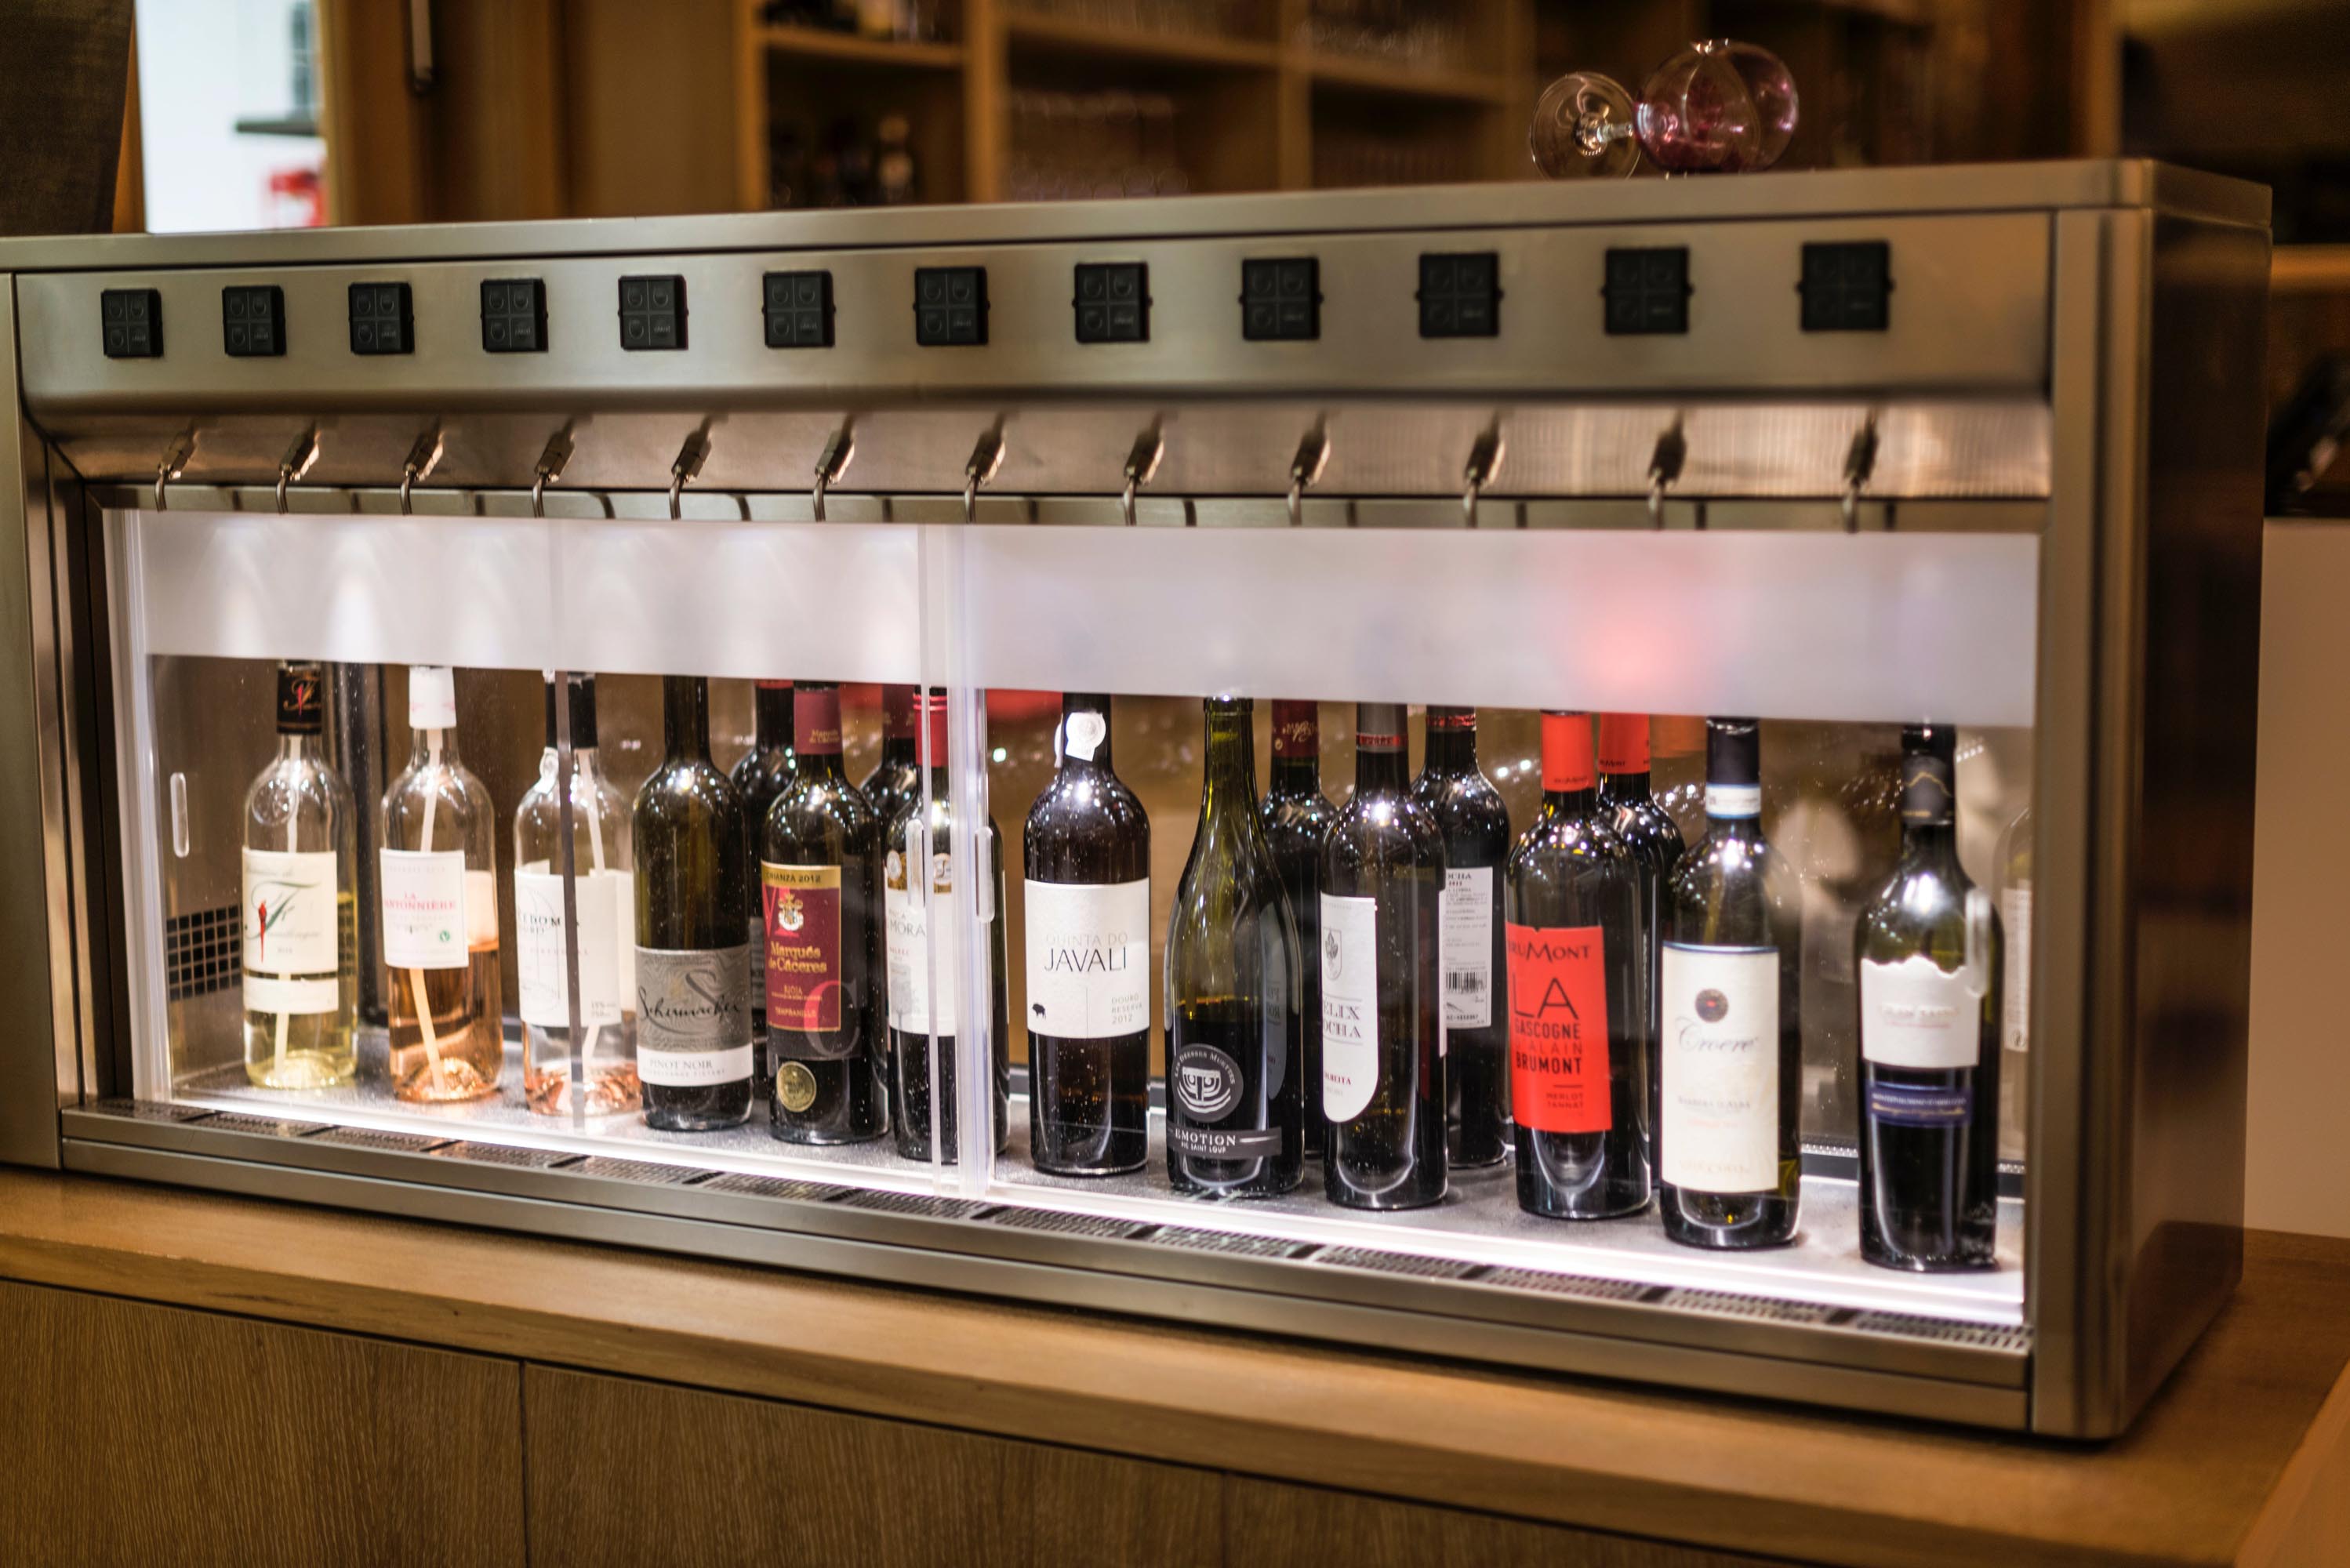 Bottles of wine in a display